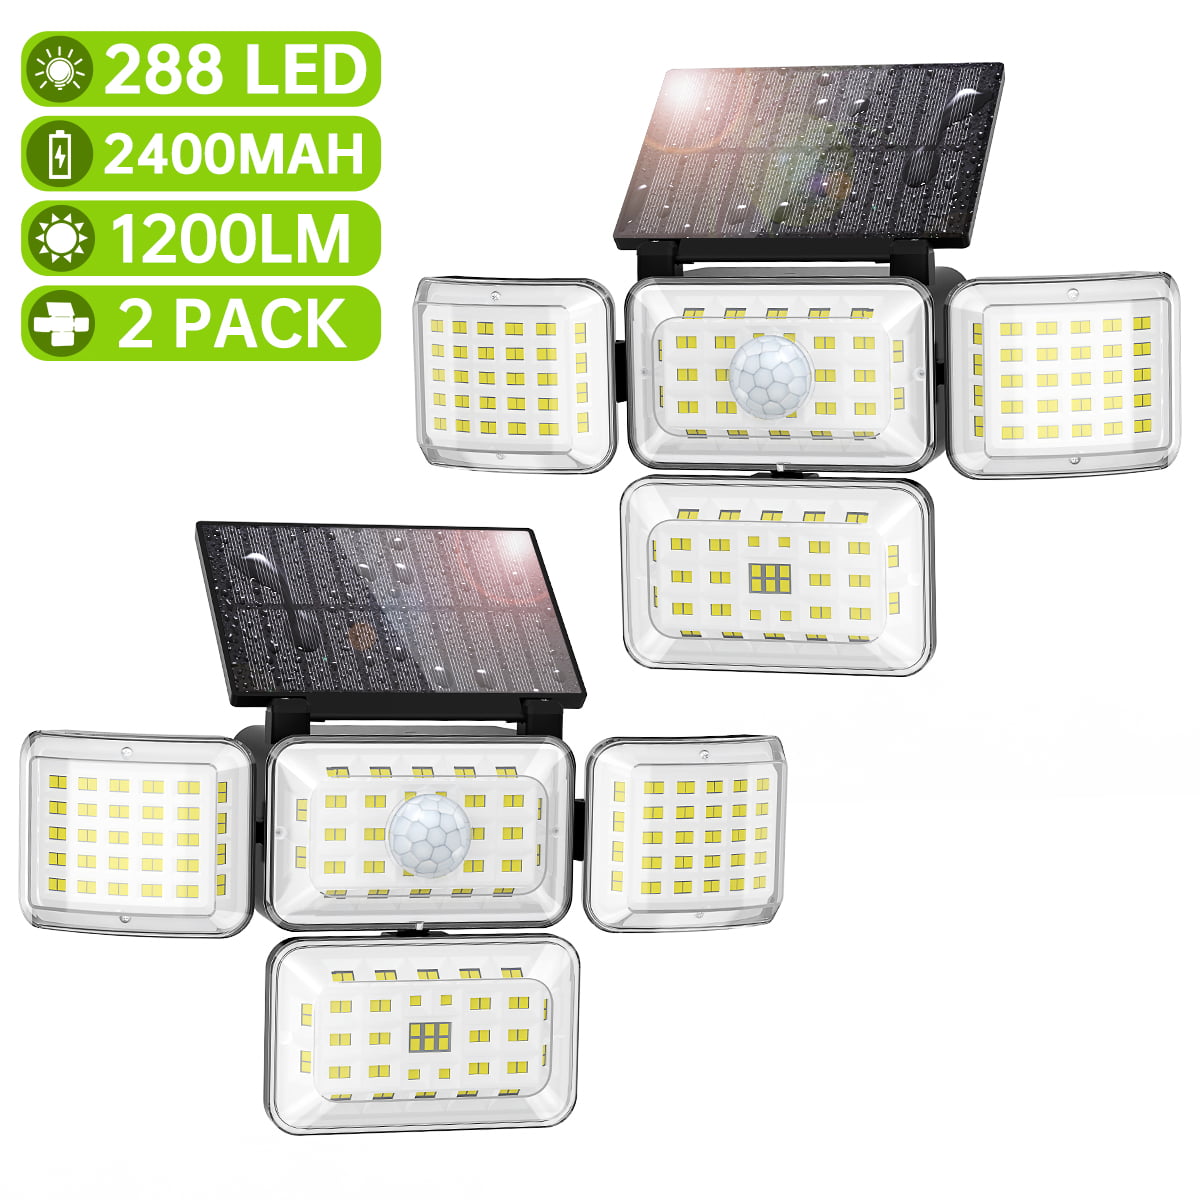 ZOOKKI Wireless Waterproof 28 LEDs Solar Powered Motion Sensor Security Wall Lights for Outside Garden Gate Driveway Stairs Patio Yard Deck Pathway Garage 2 Pack ZK-SL-101 Solar Motion Sensor Lights Outdoor